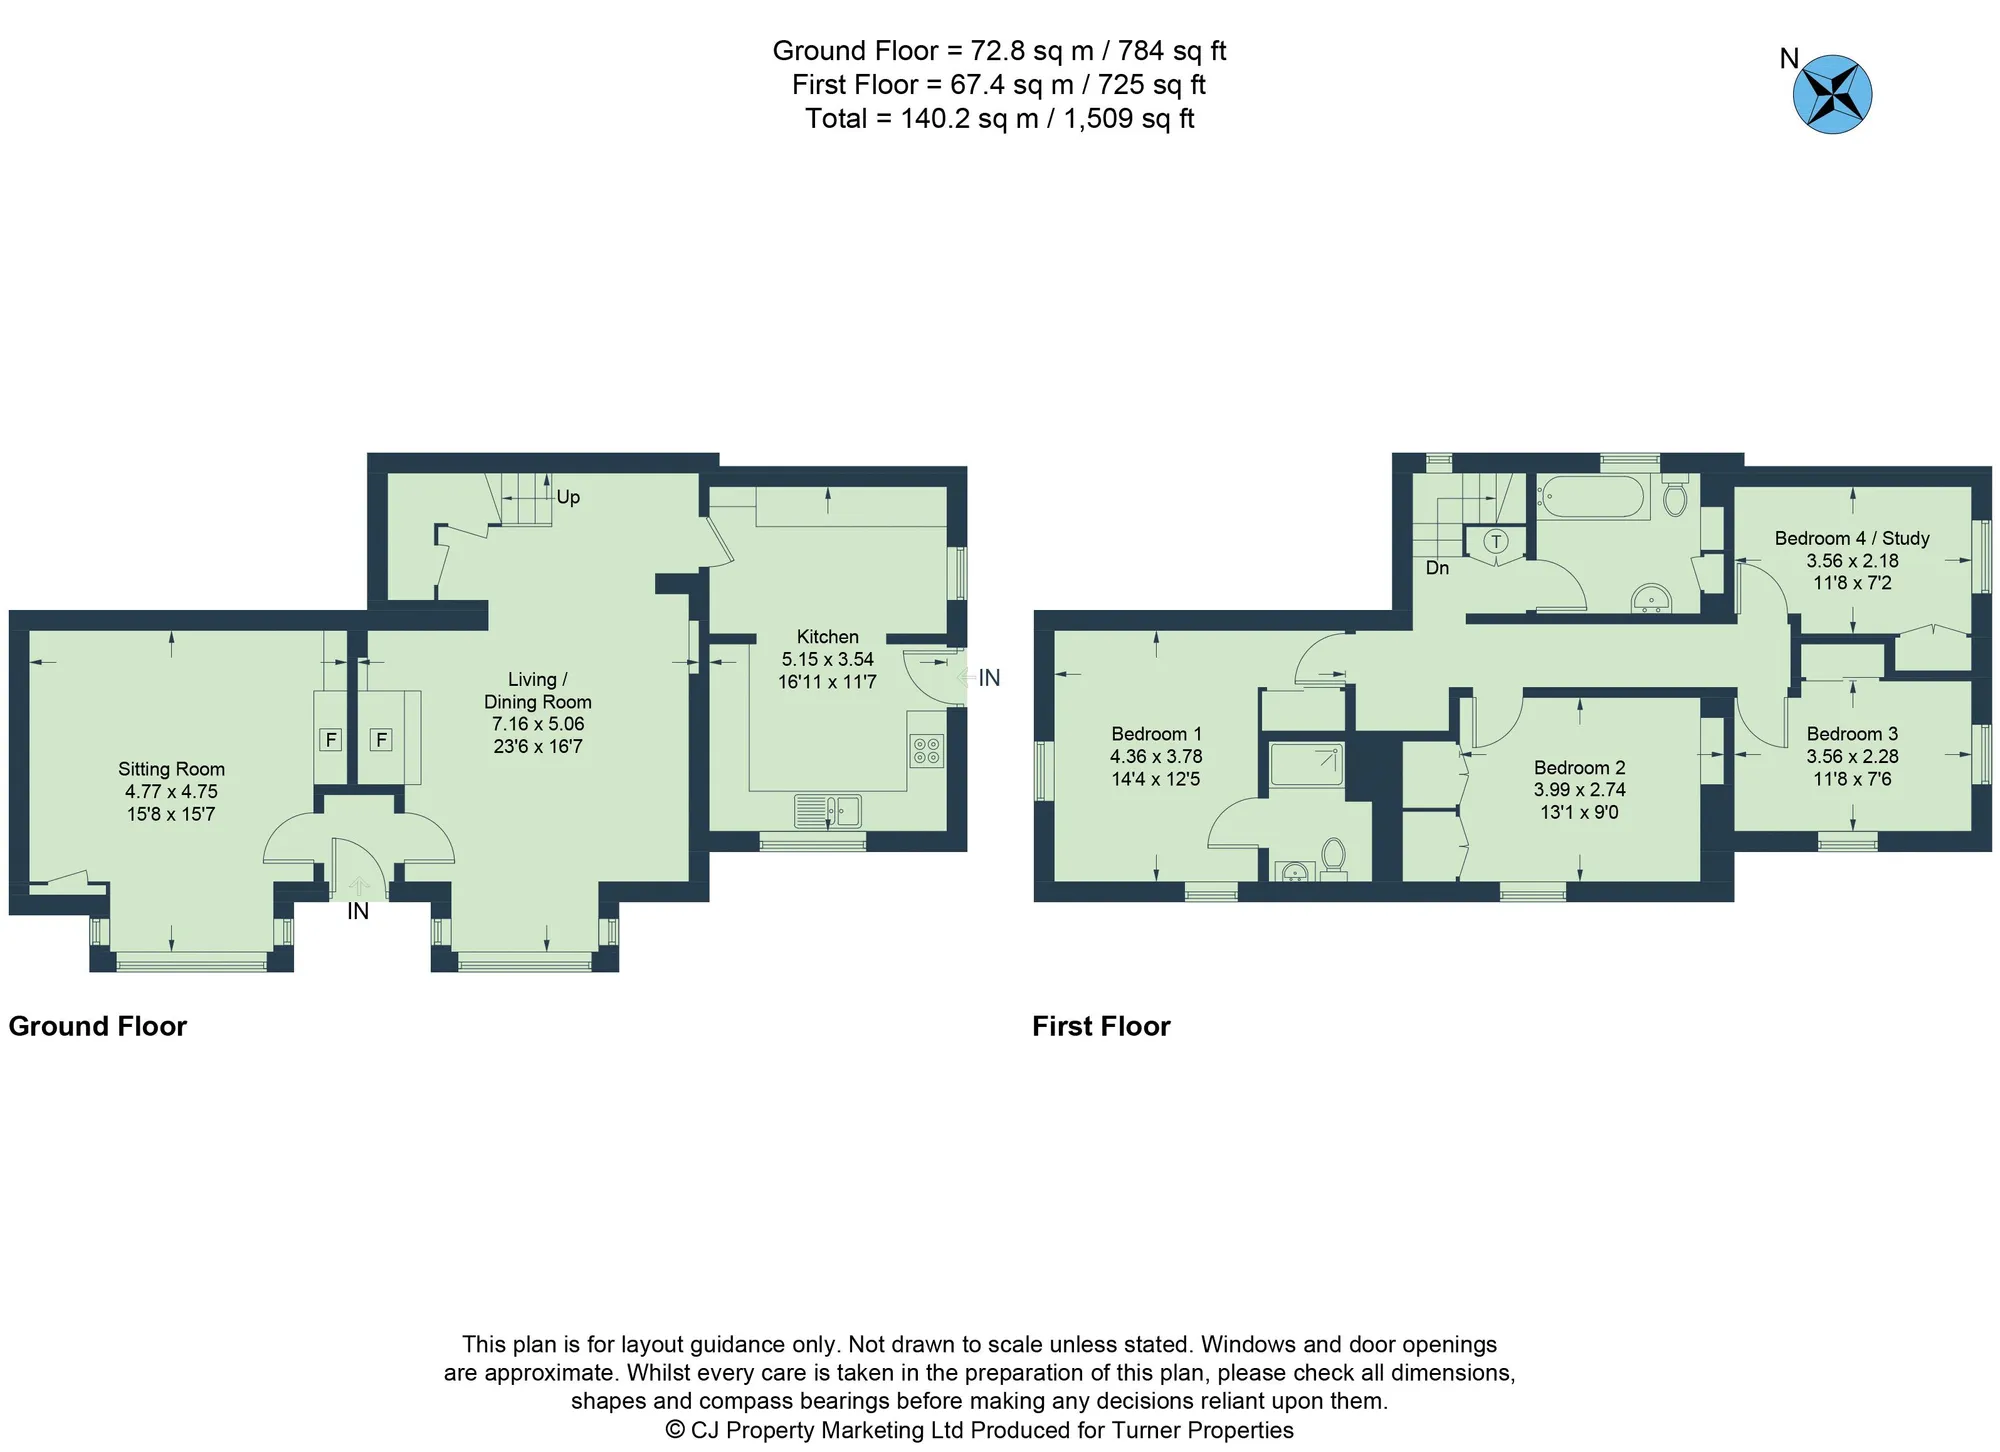 4 bed for sale in Waterperry, Oxford - Property floorplan